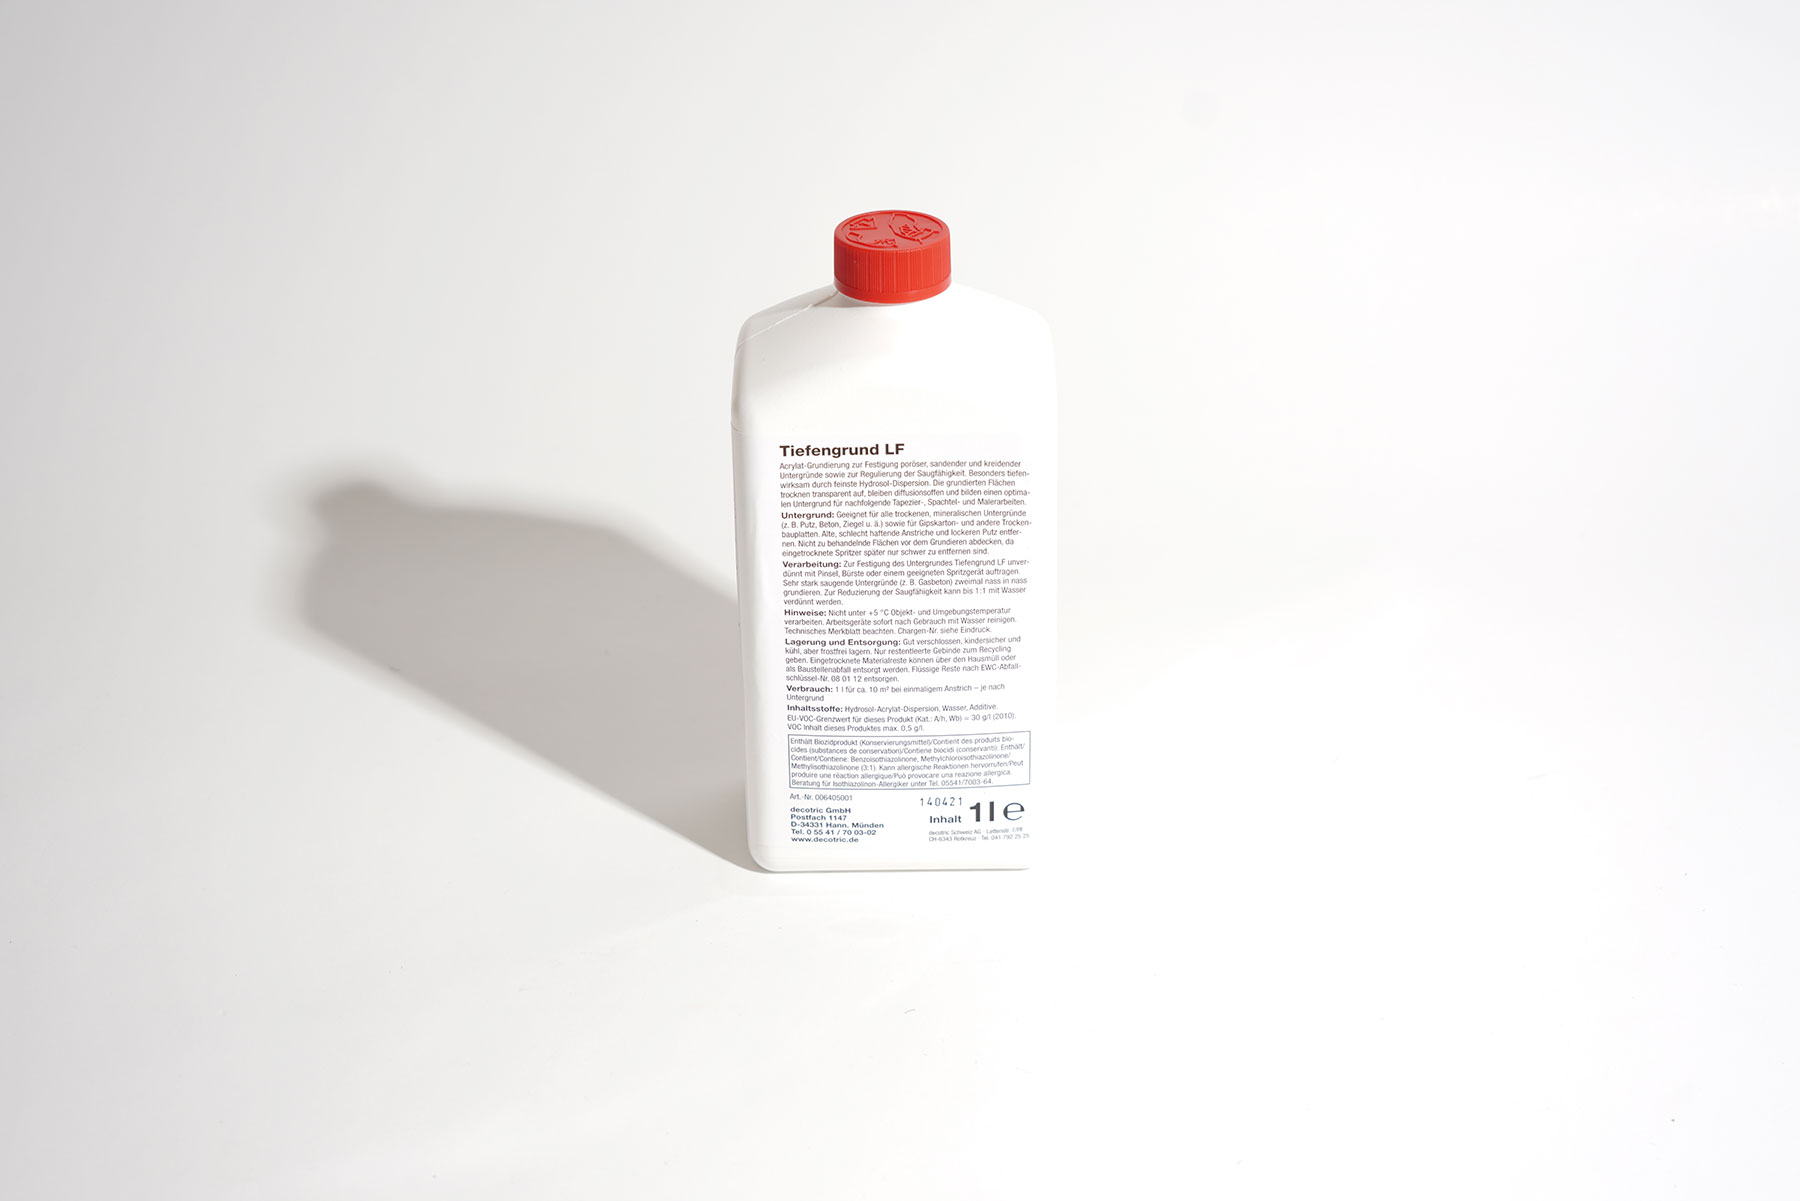             Tiefengrung 1L, for priming wall surfaces
        